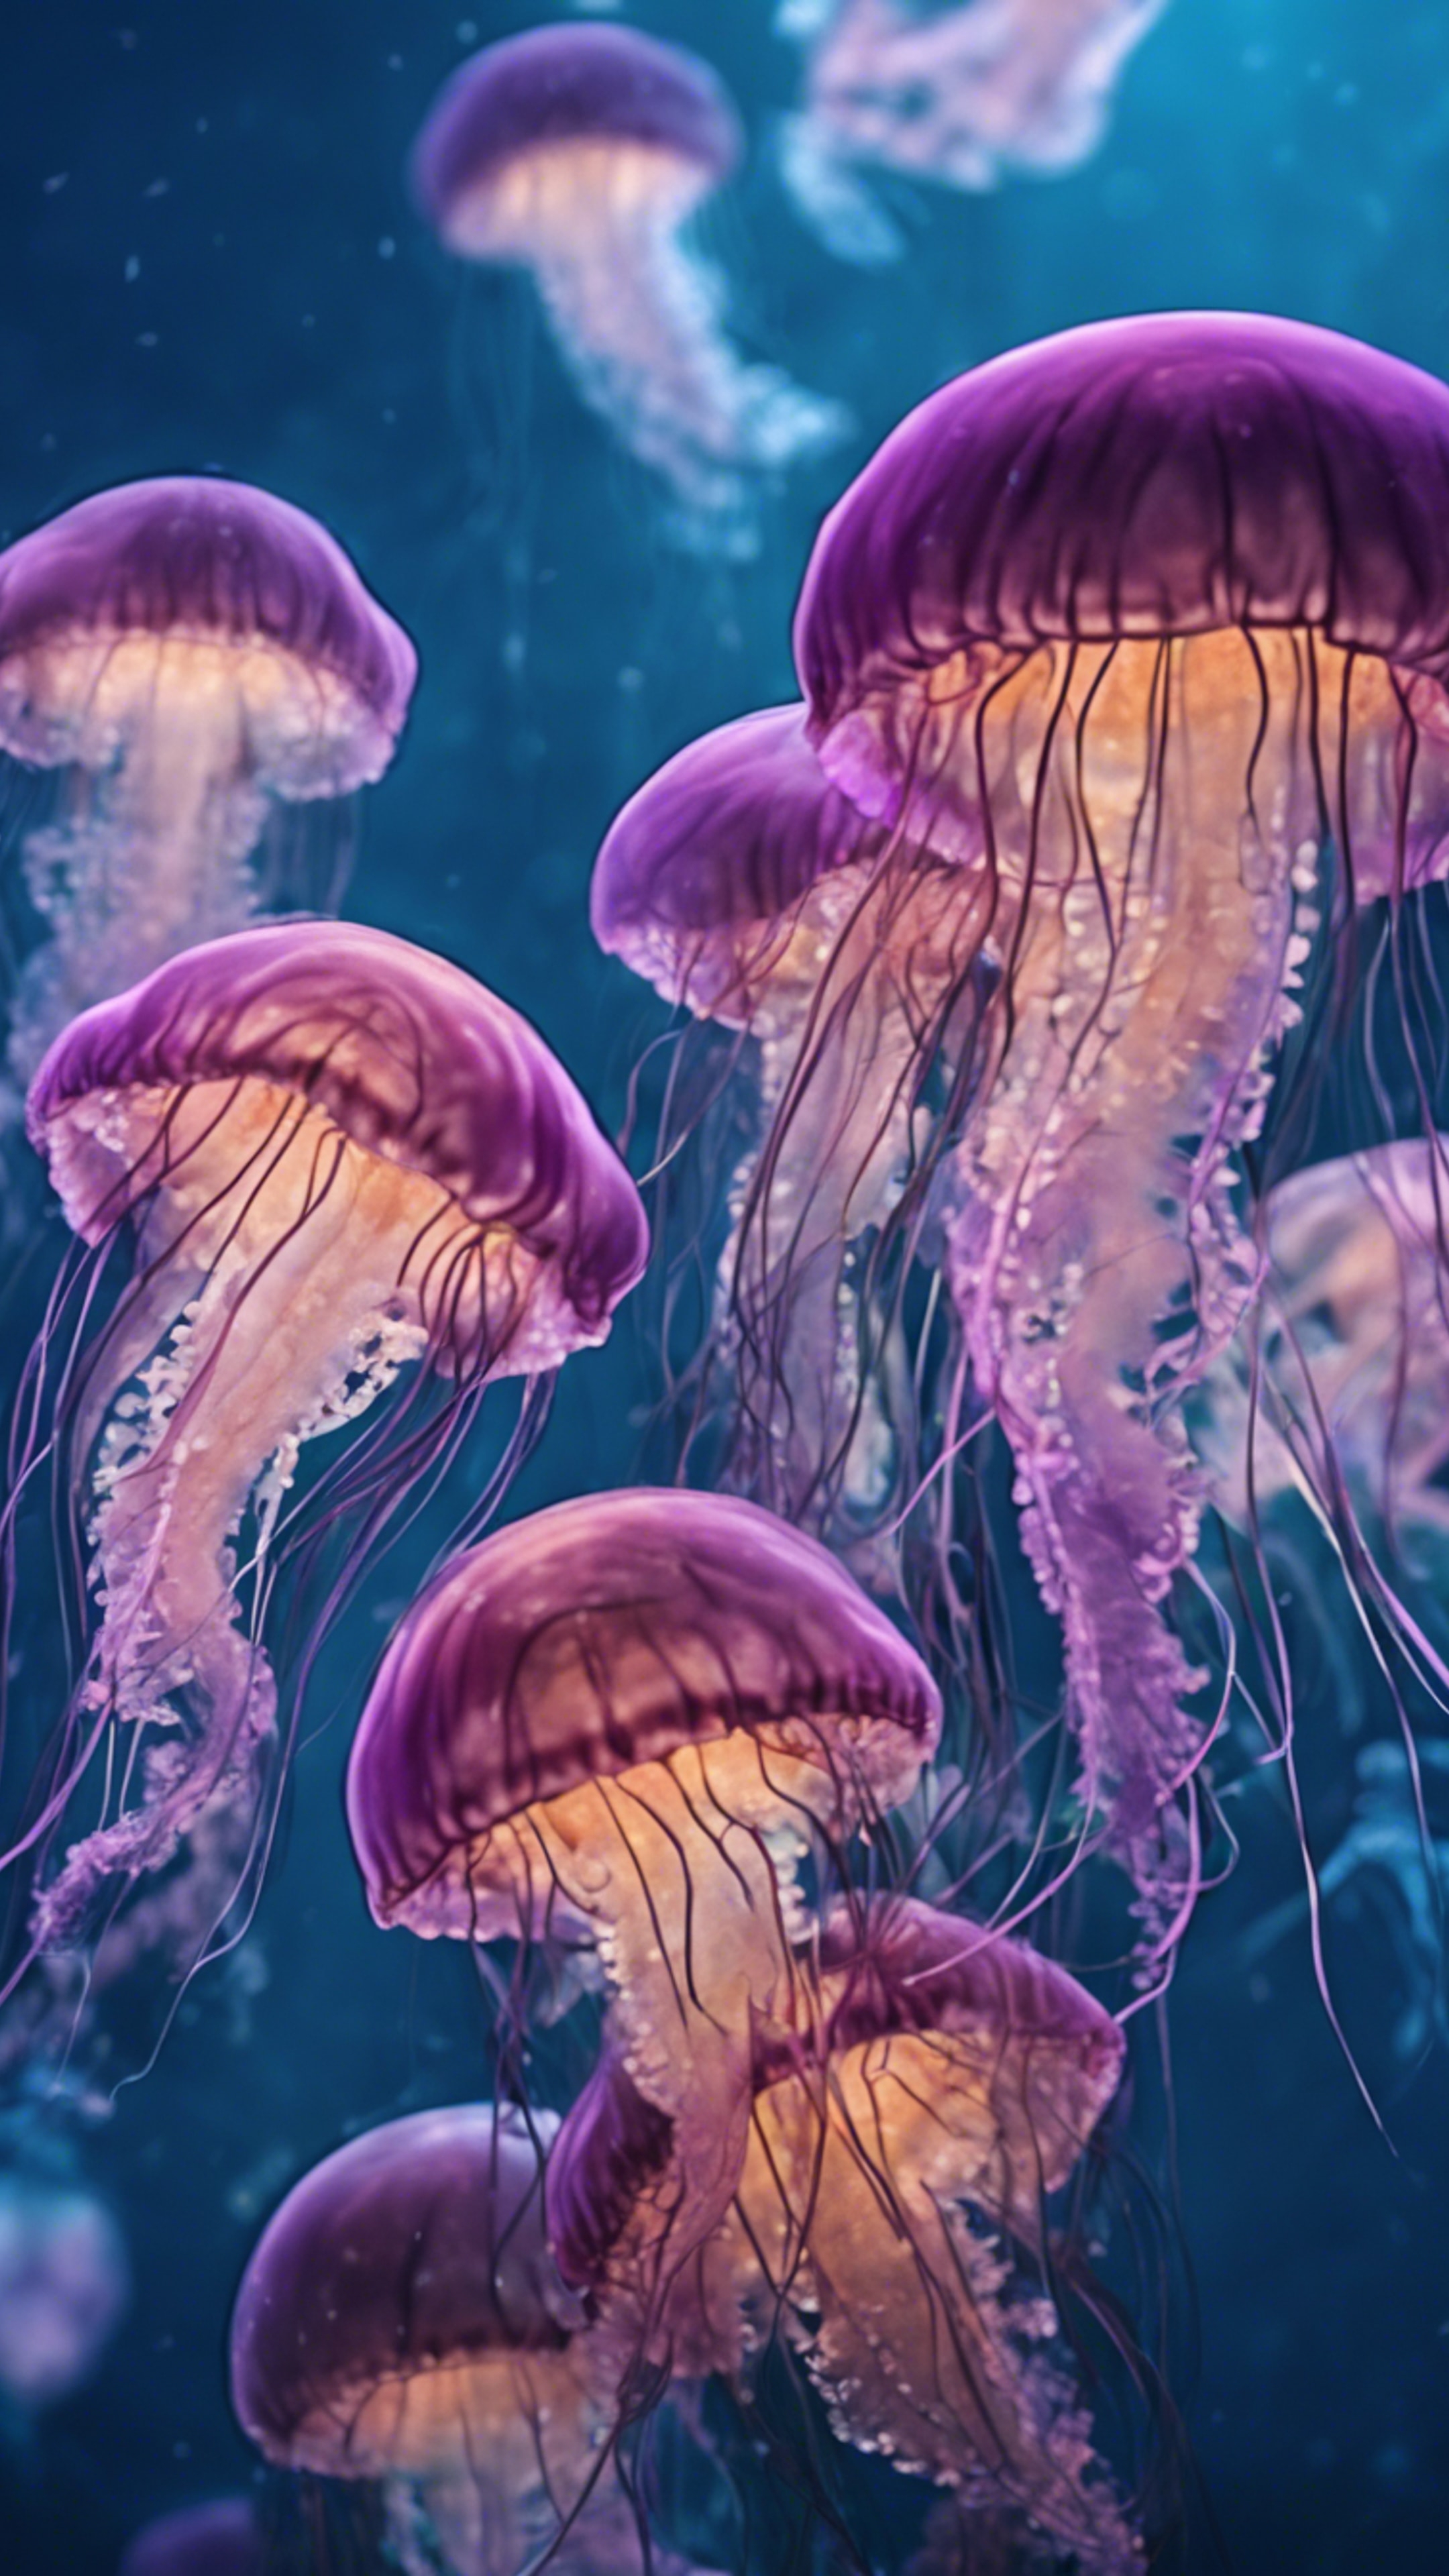 A detailed illustration of a group of ethereal jellyfish glowing in hues of blues and purples in the deep ocean. ورق الجدران[9d08a2d997244e79aa03]